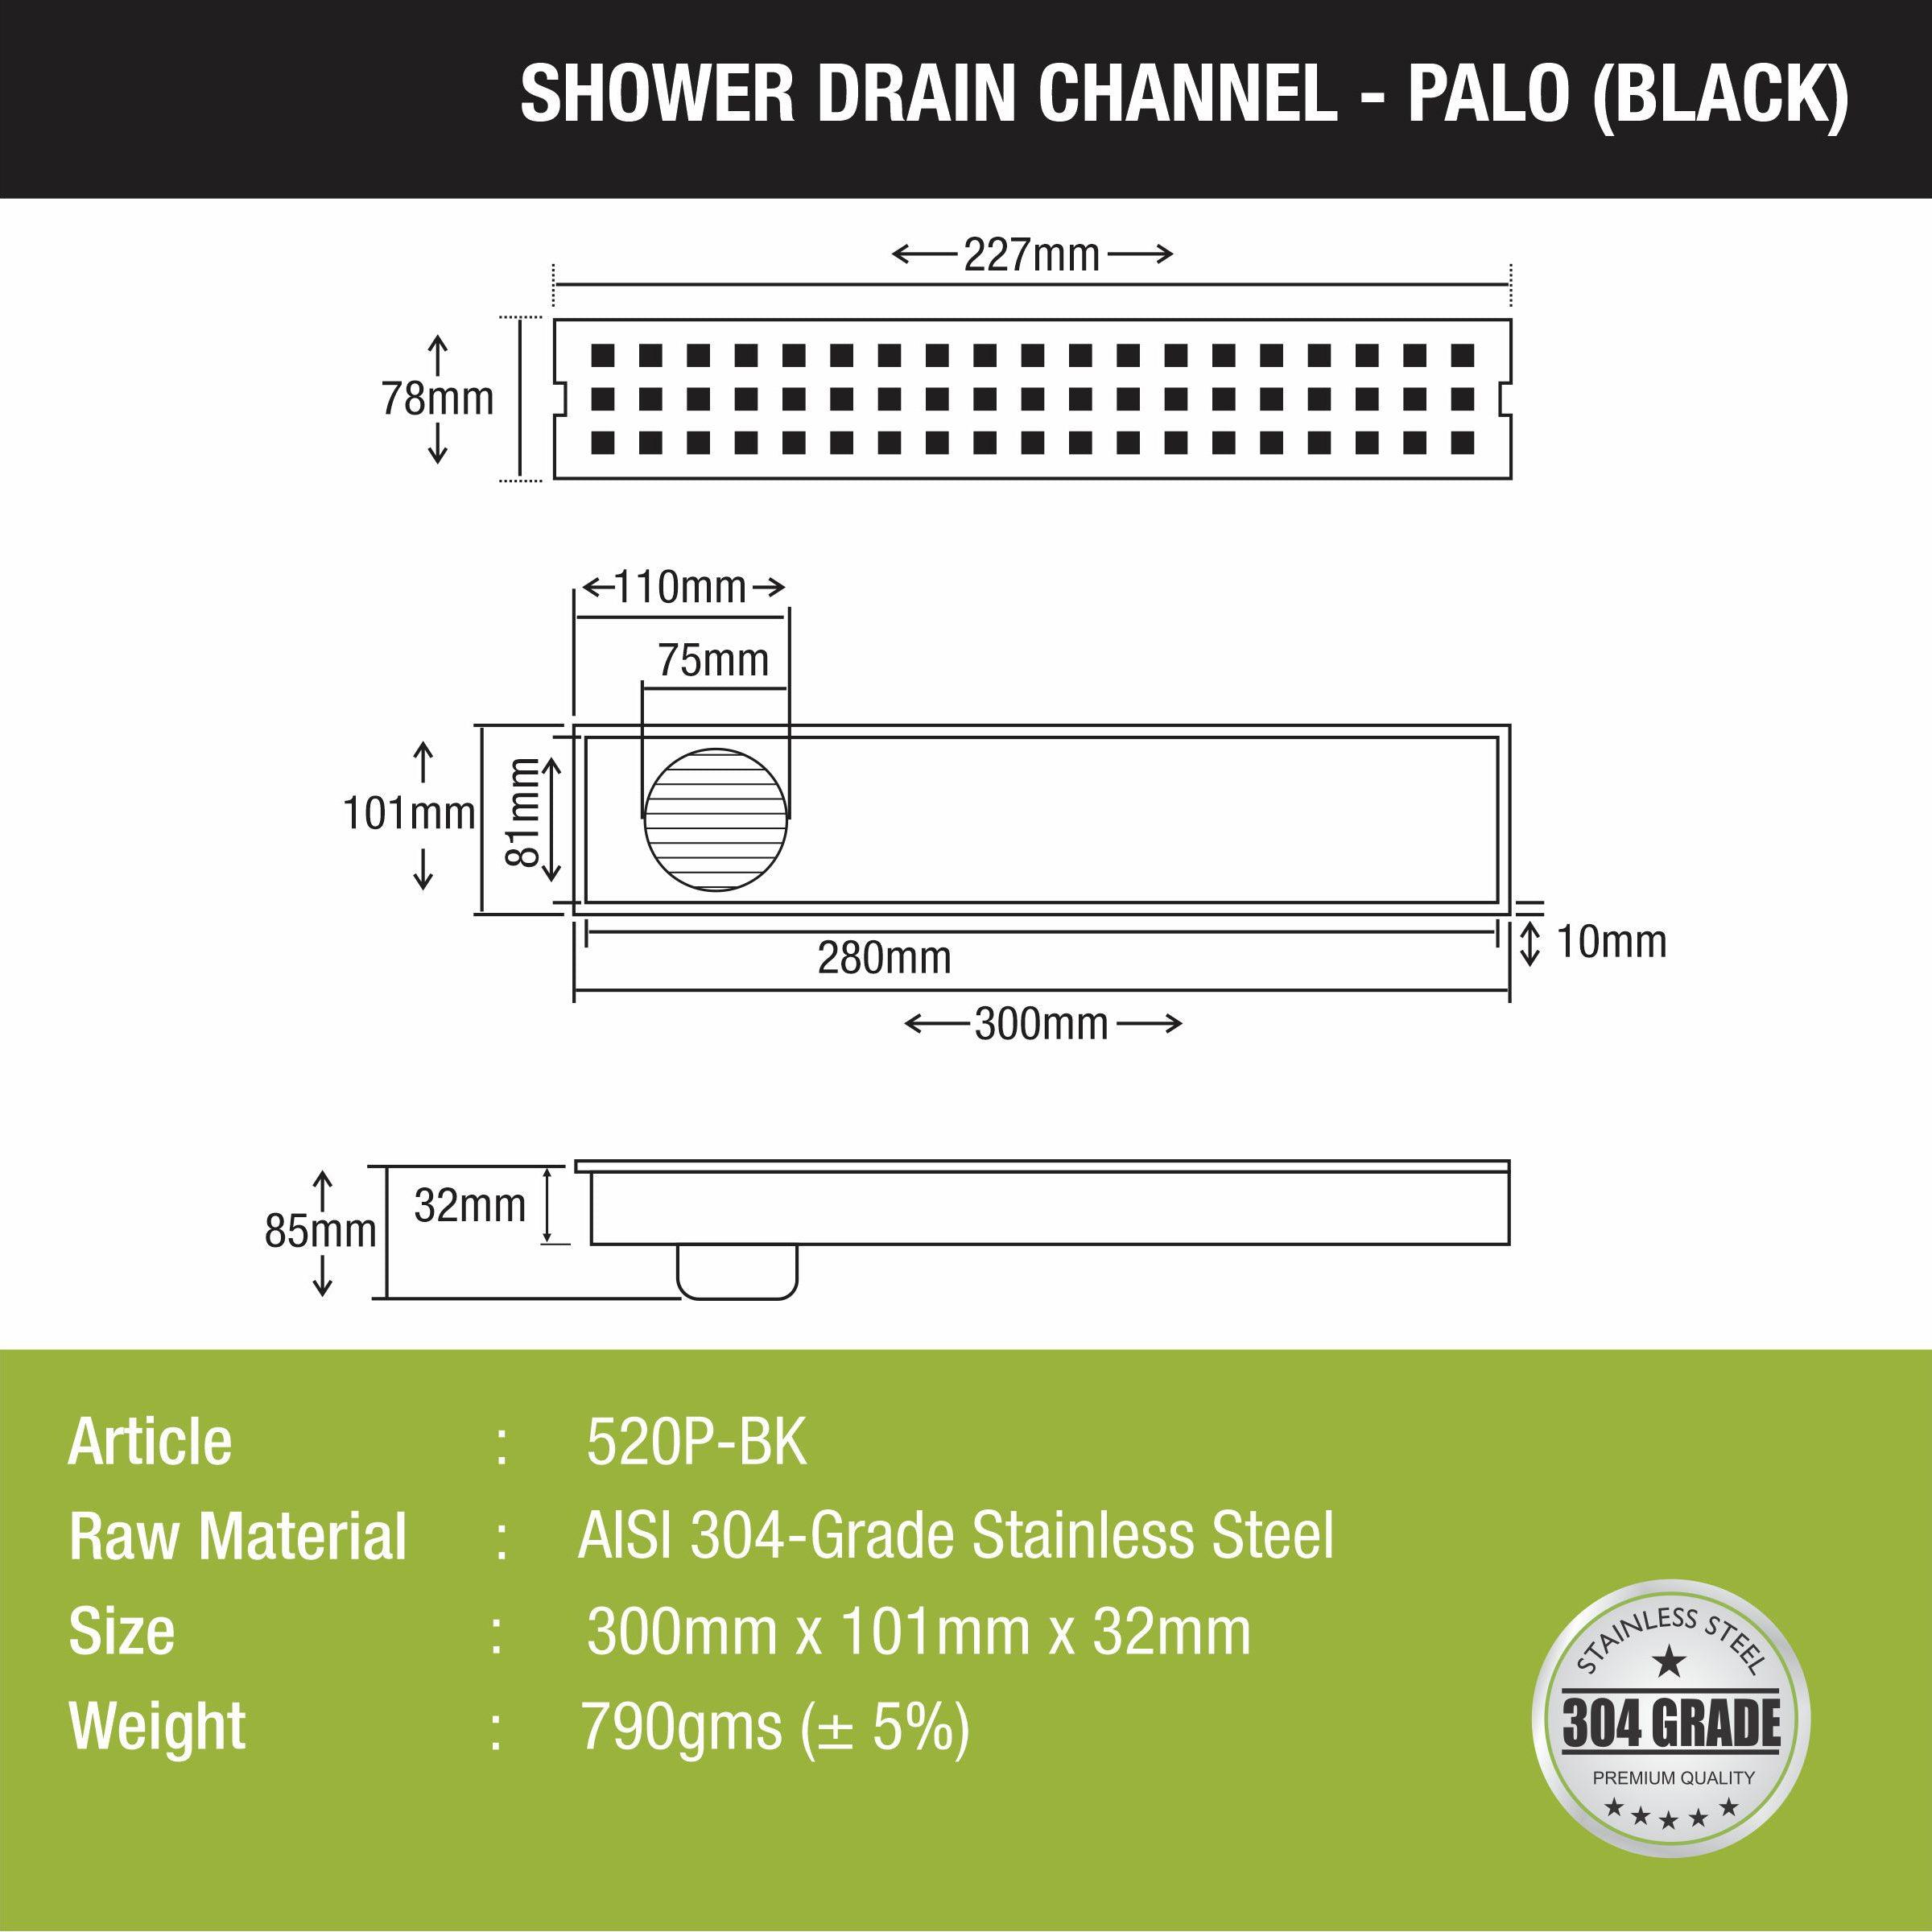 Palo Shower Drain Channel -Black (12 x 4 Inches)  size and measurement